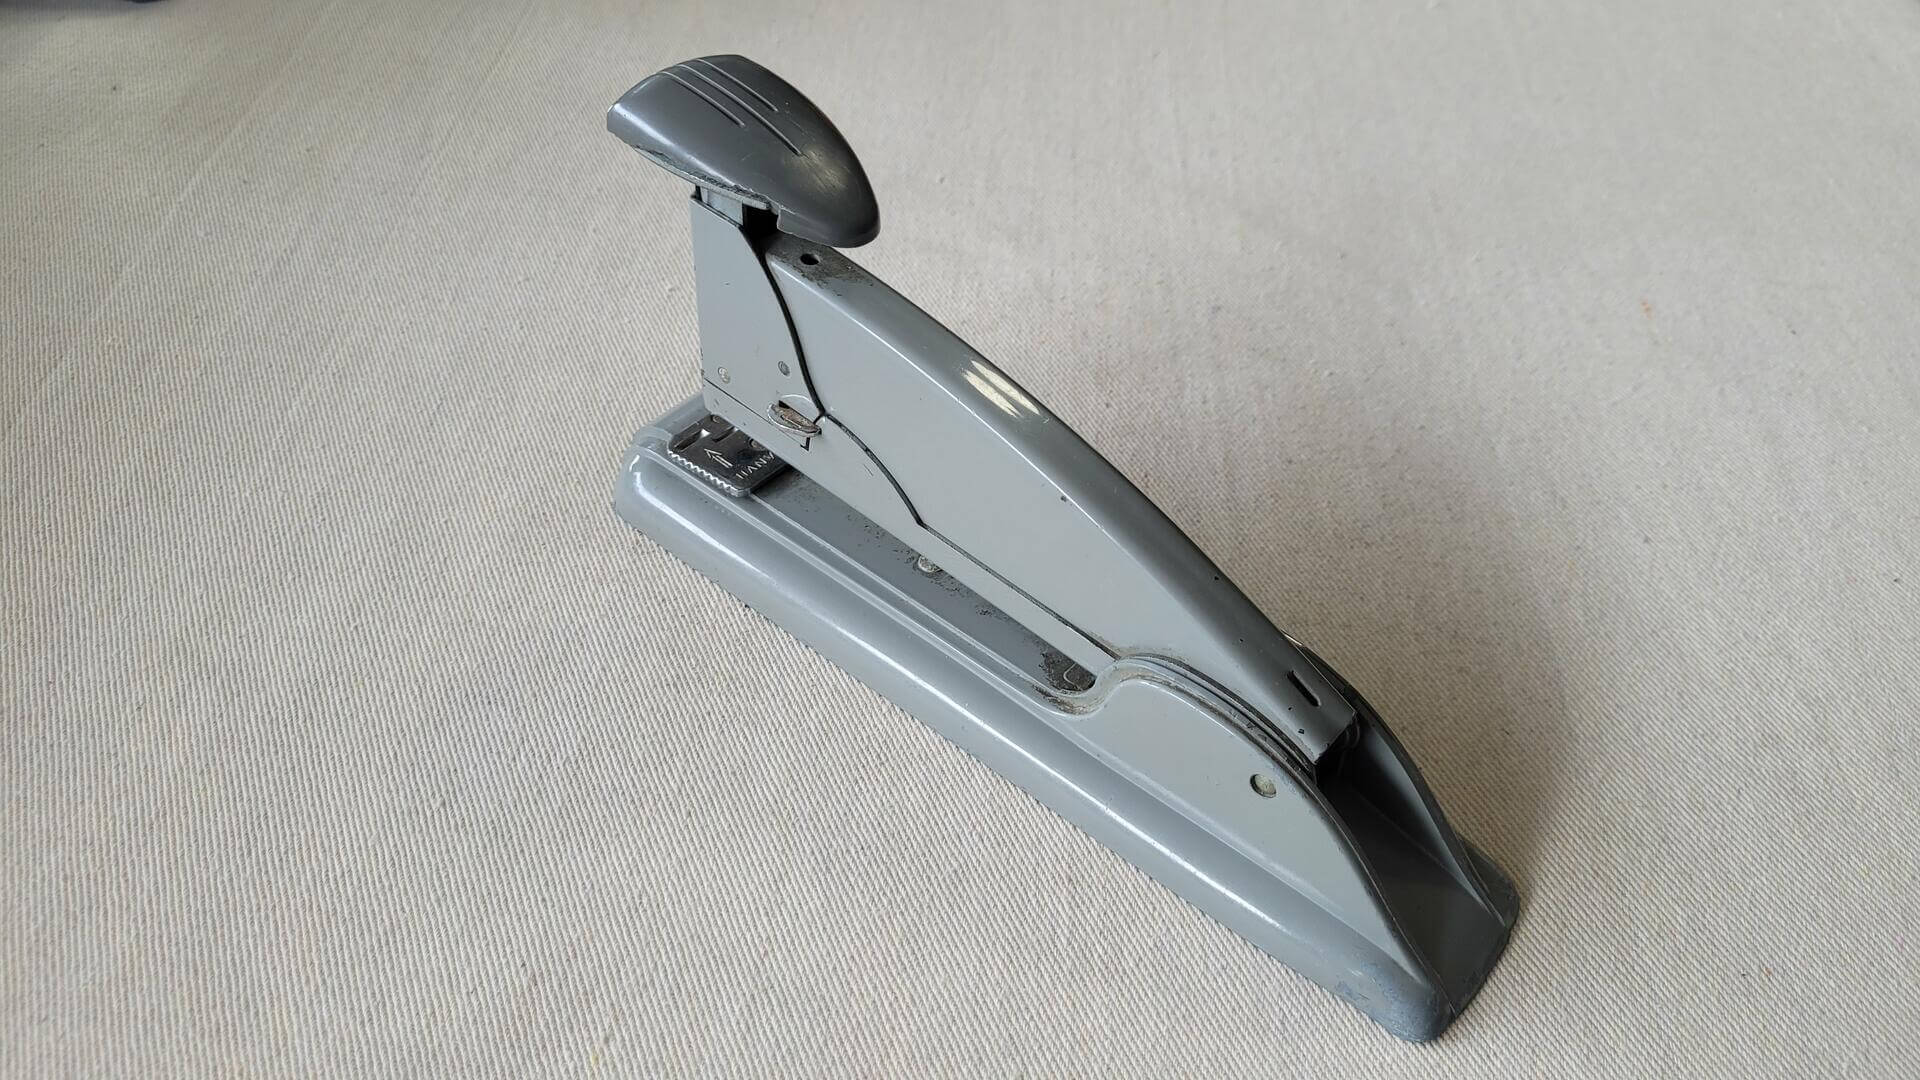 Swingine Speed Stapler No. 4 in battleship gray colour. Antique made in USA collectible industrial art deco design office equipment & stationary 1937 patent